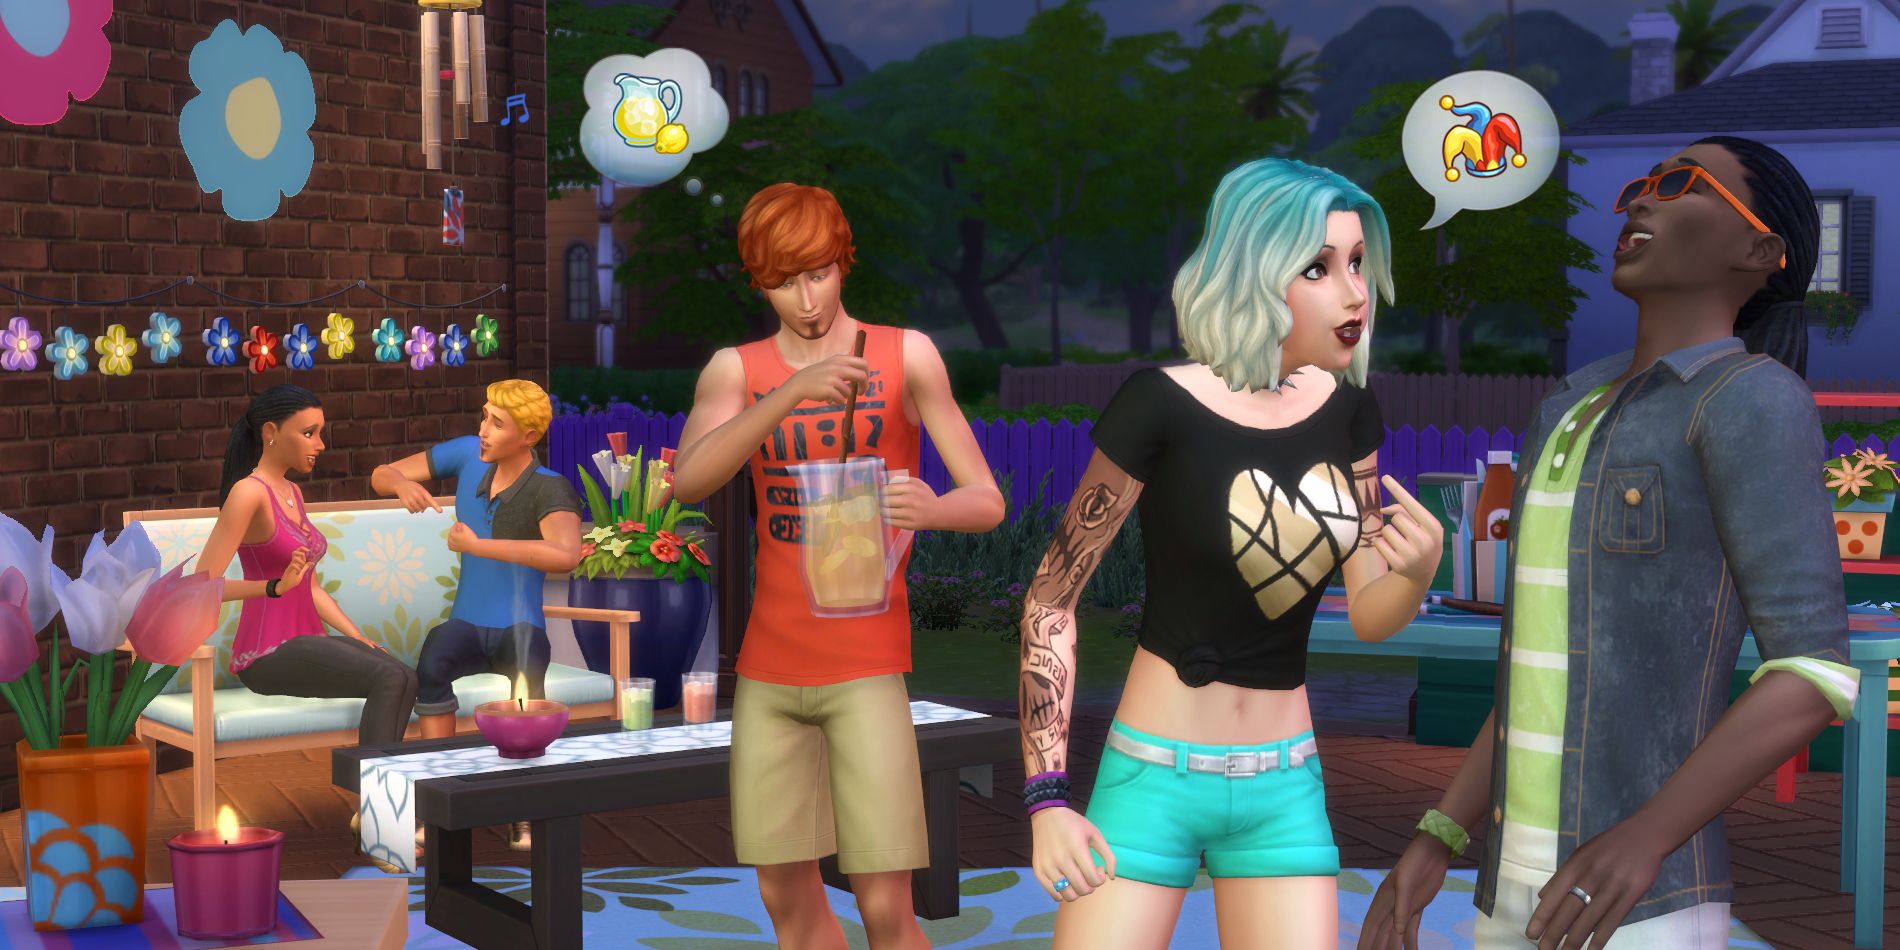 How to Get Install the Slice of Life Mod for The Sims 4 Party